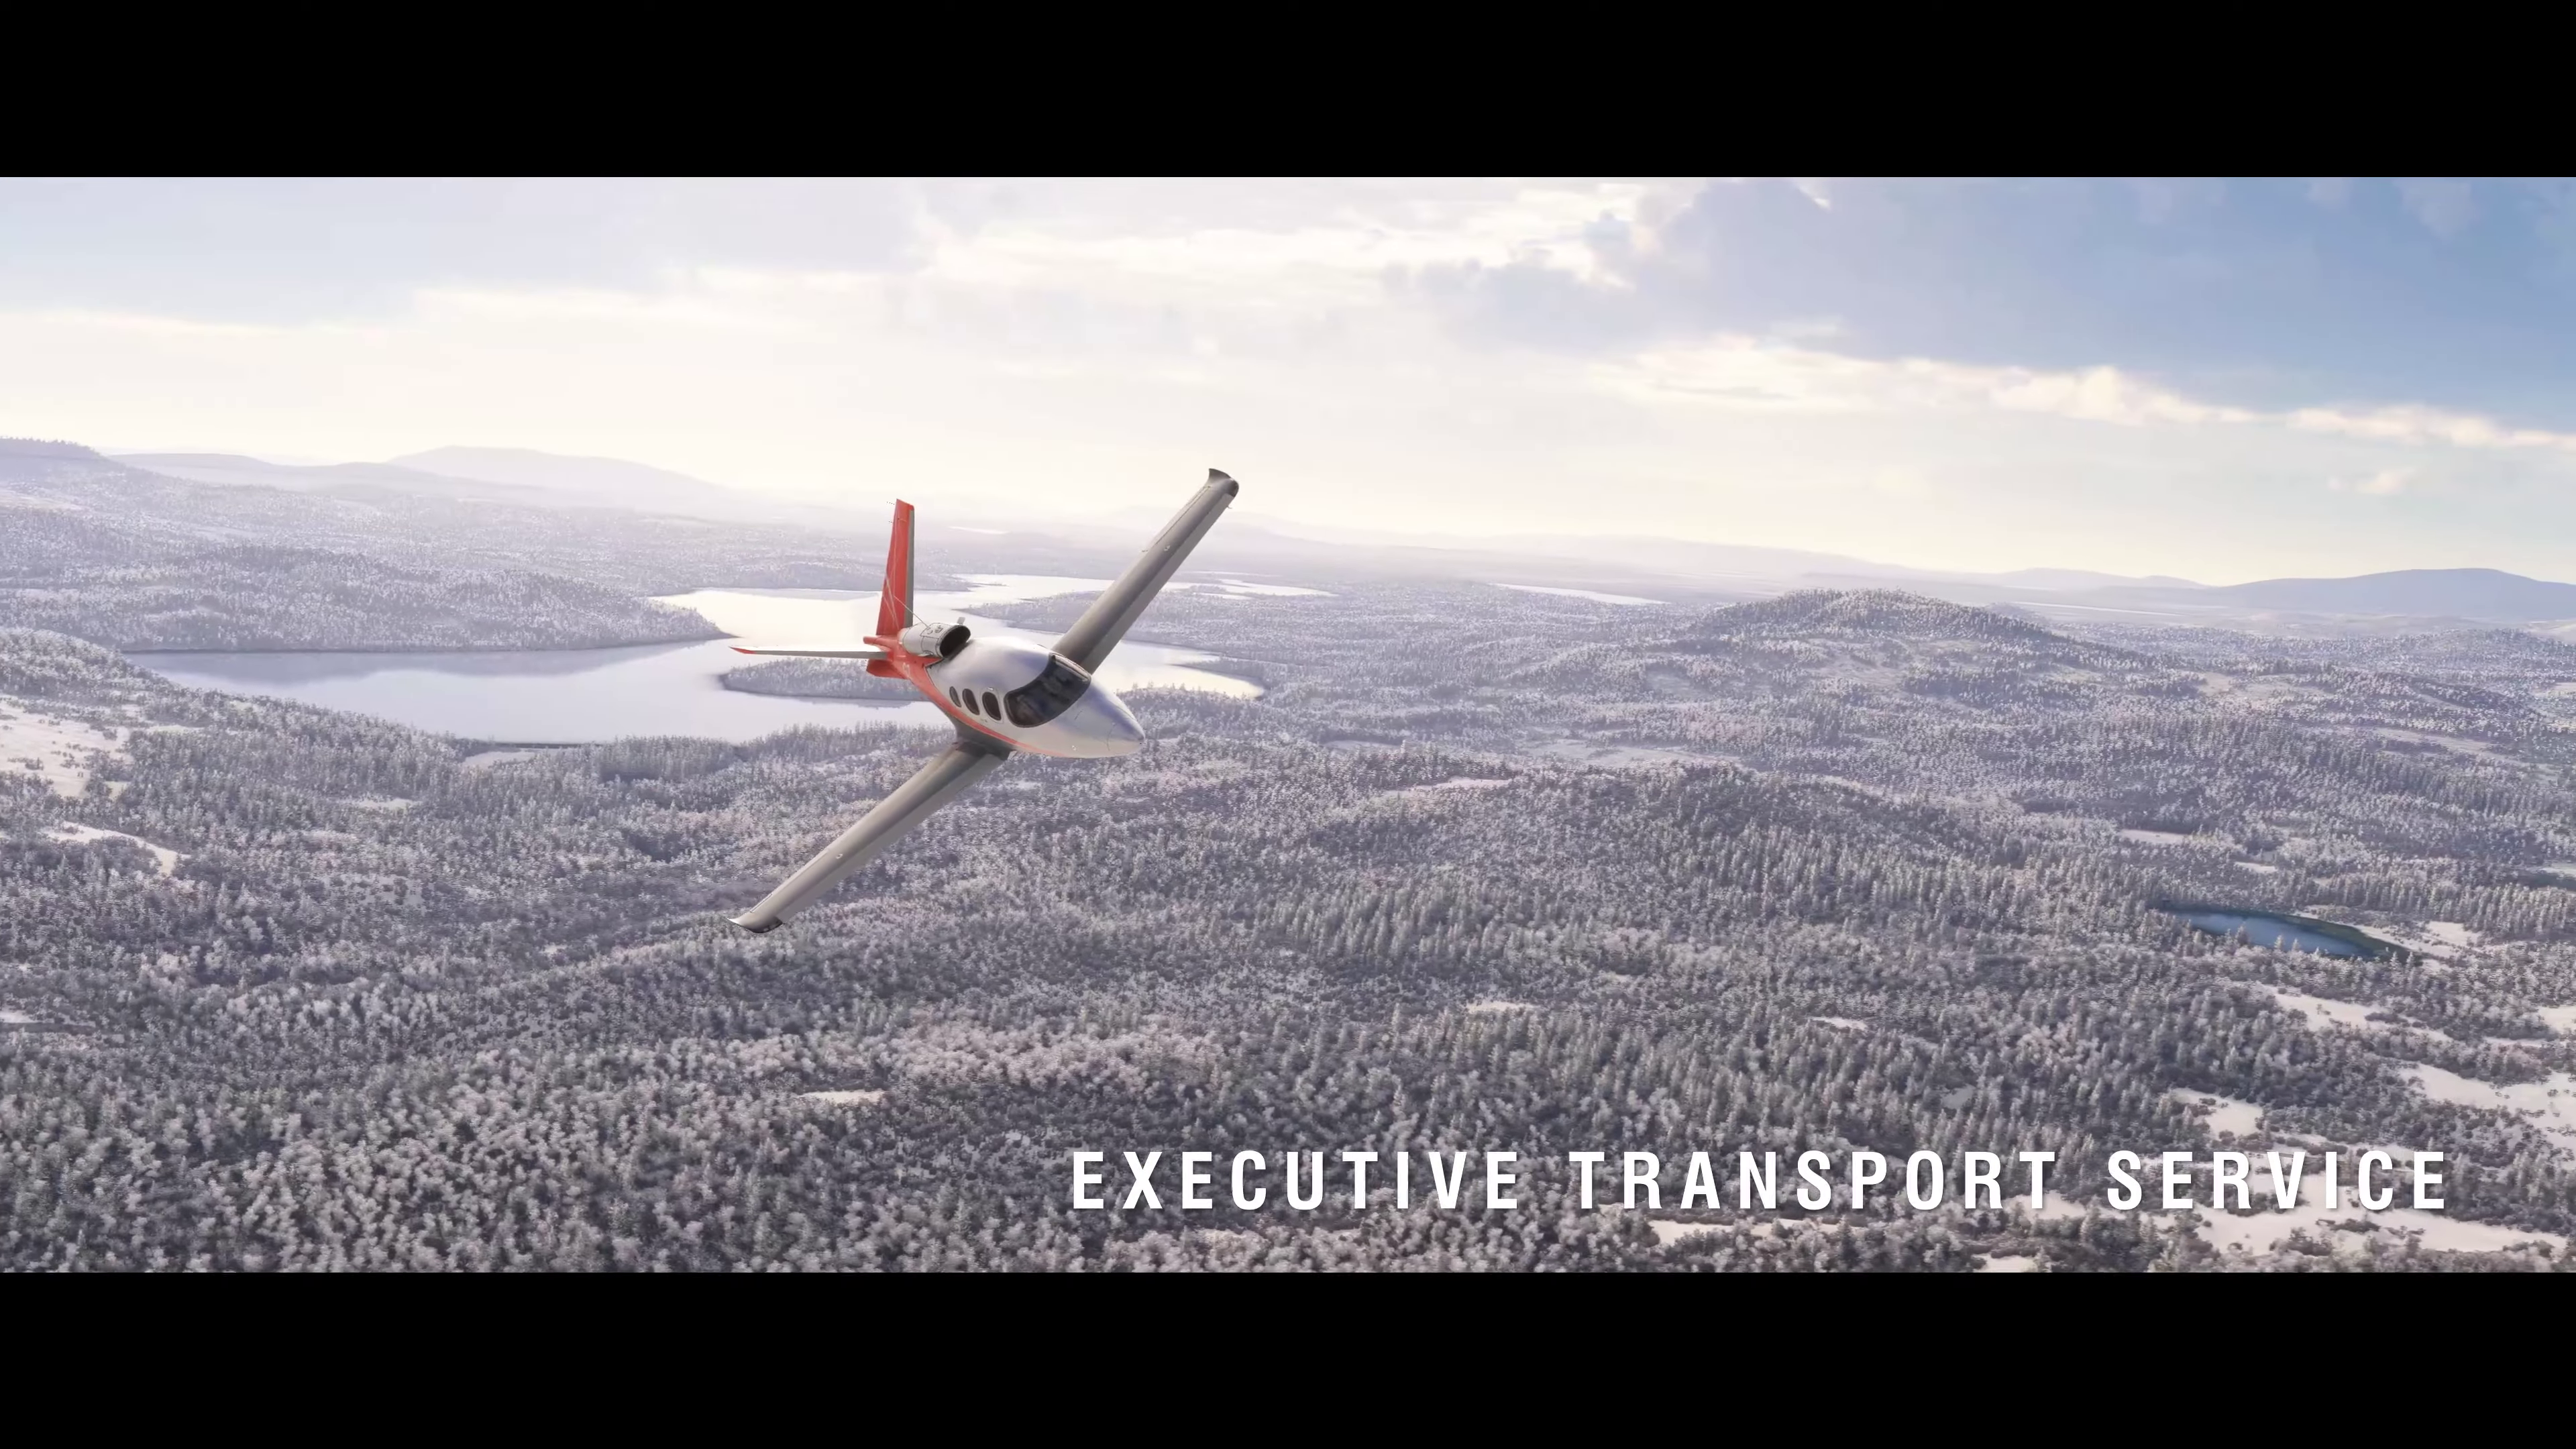 Microsoft Flight Simulator 2024 Introduces Playable Aviation Jobs Including  Firefighting, Rescues, & More - Out of Games